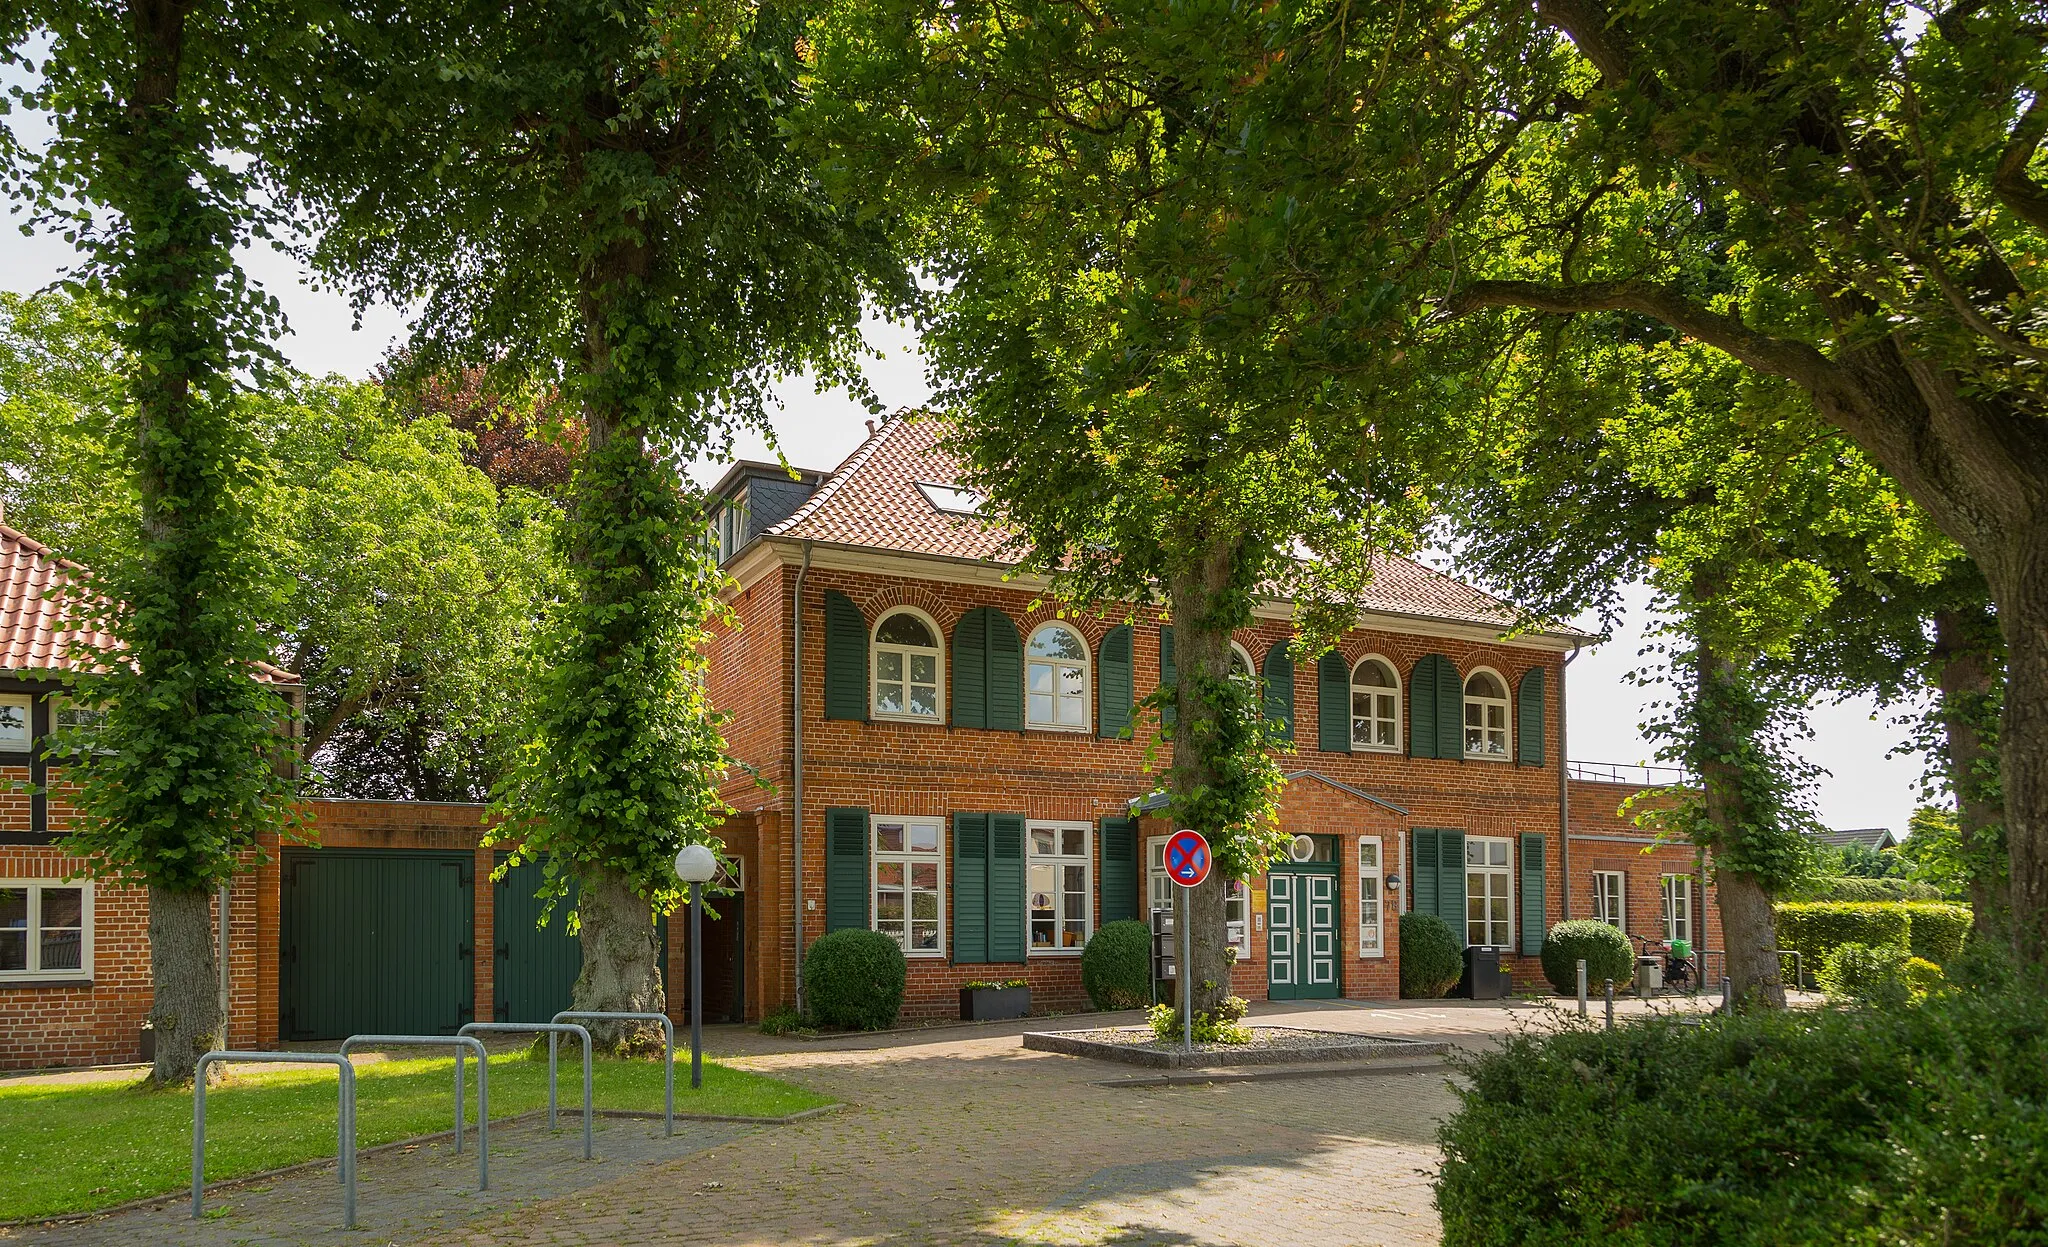 Photo showing: The former Villa Jebsen in Stockelsdorf, Kreis Ostholstein, Schleswig-Holstein, Germany. Nowadays a community centre including the public library and the youth club.